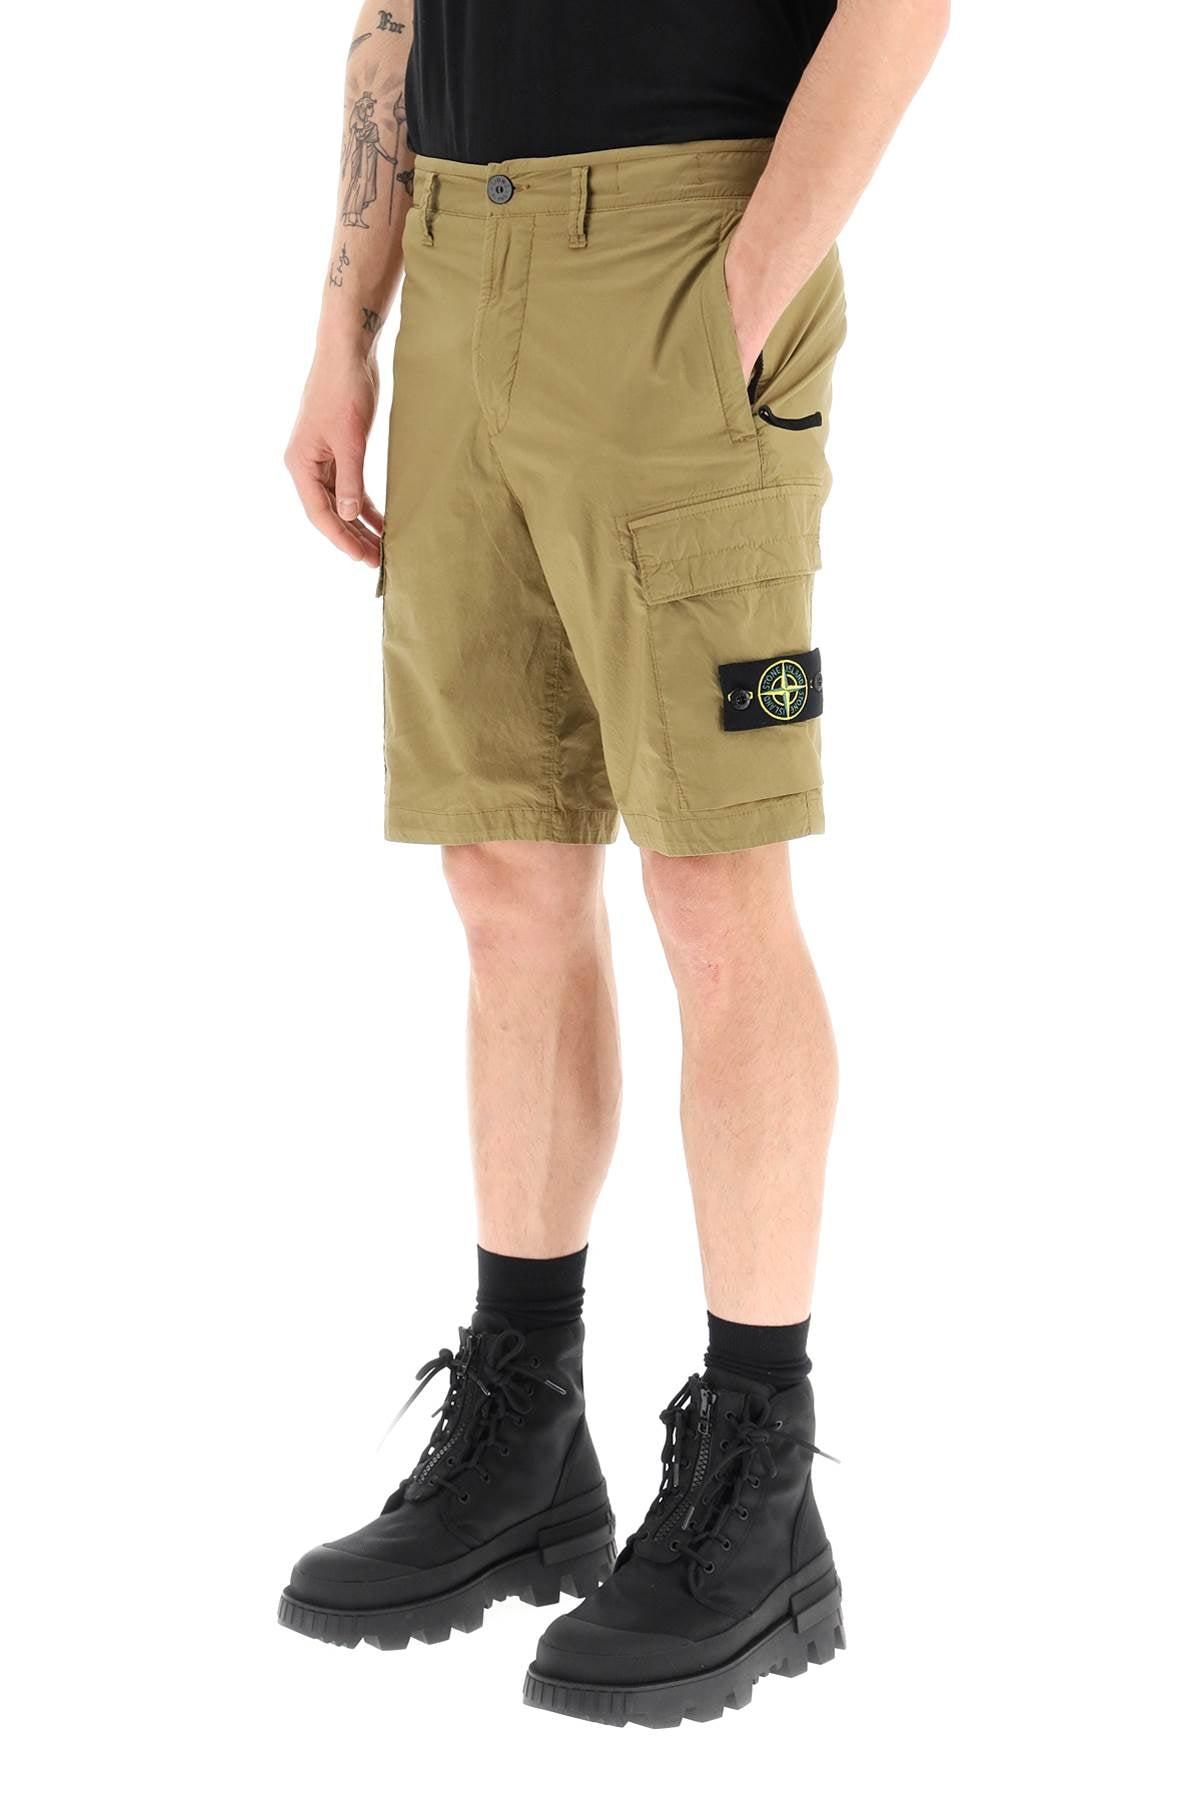 Stone Island Cargo Shorts In Lightweight Stretch Cotton in Green for Men |  Lyst